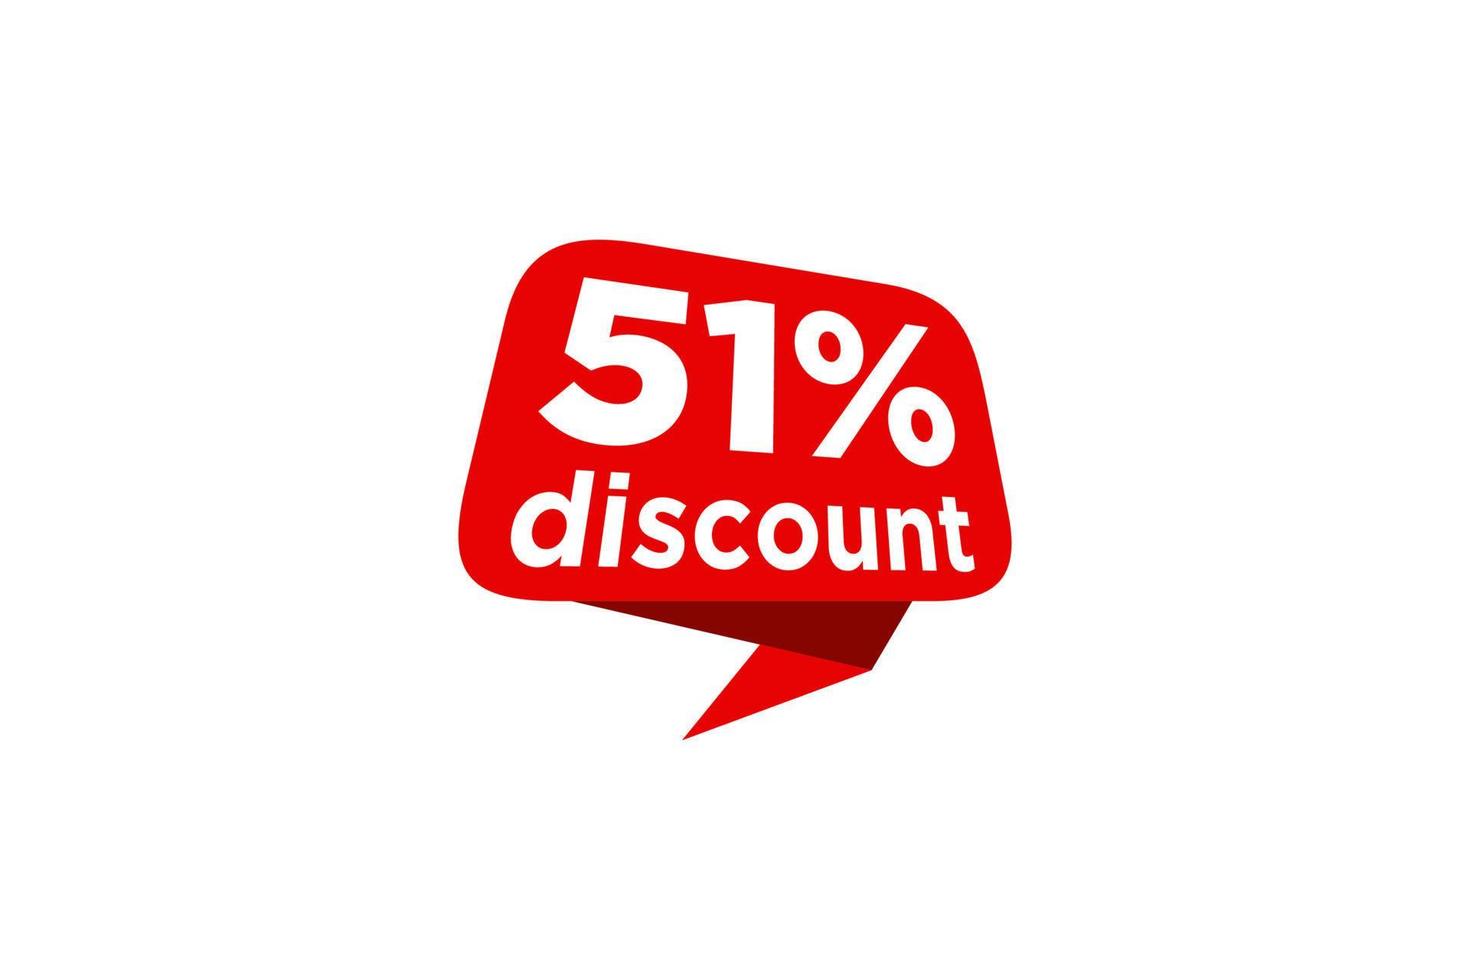 51 discount, Sales Vector badges for Labels, , Stickers, Banners, Tags, Web Stickers, New offer. Discount origami sign banner.